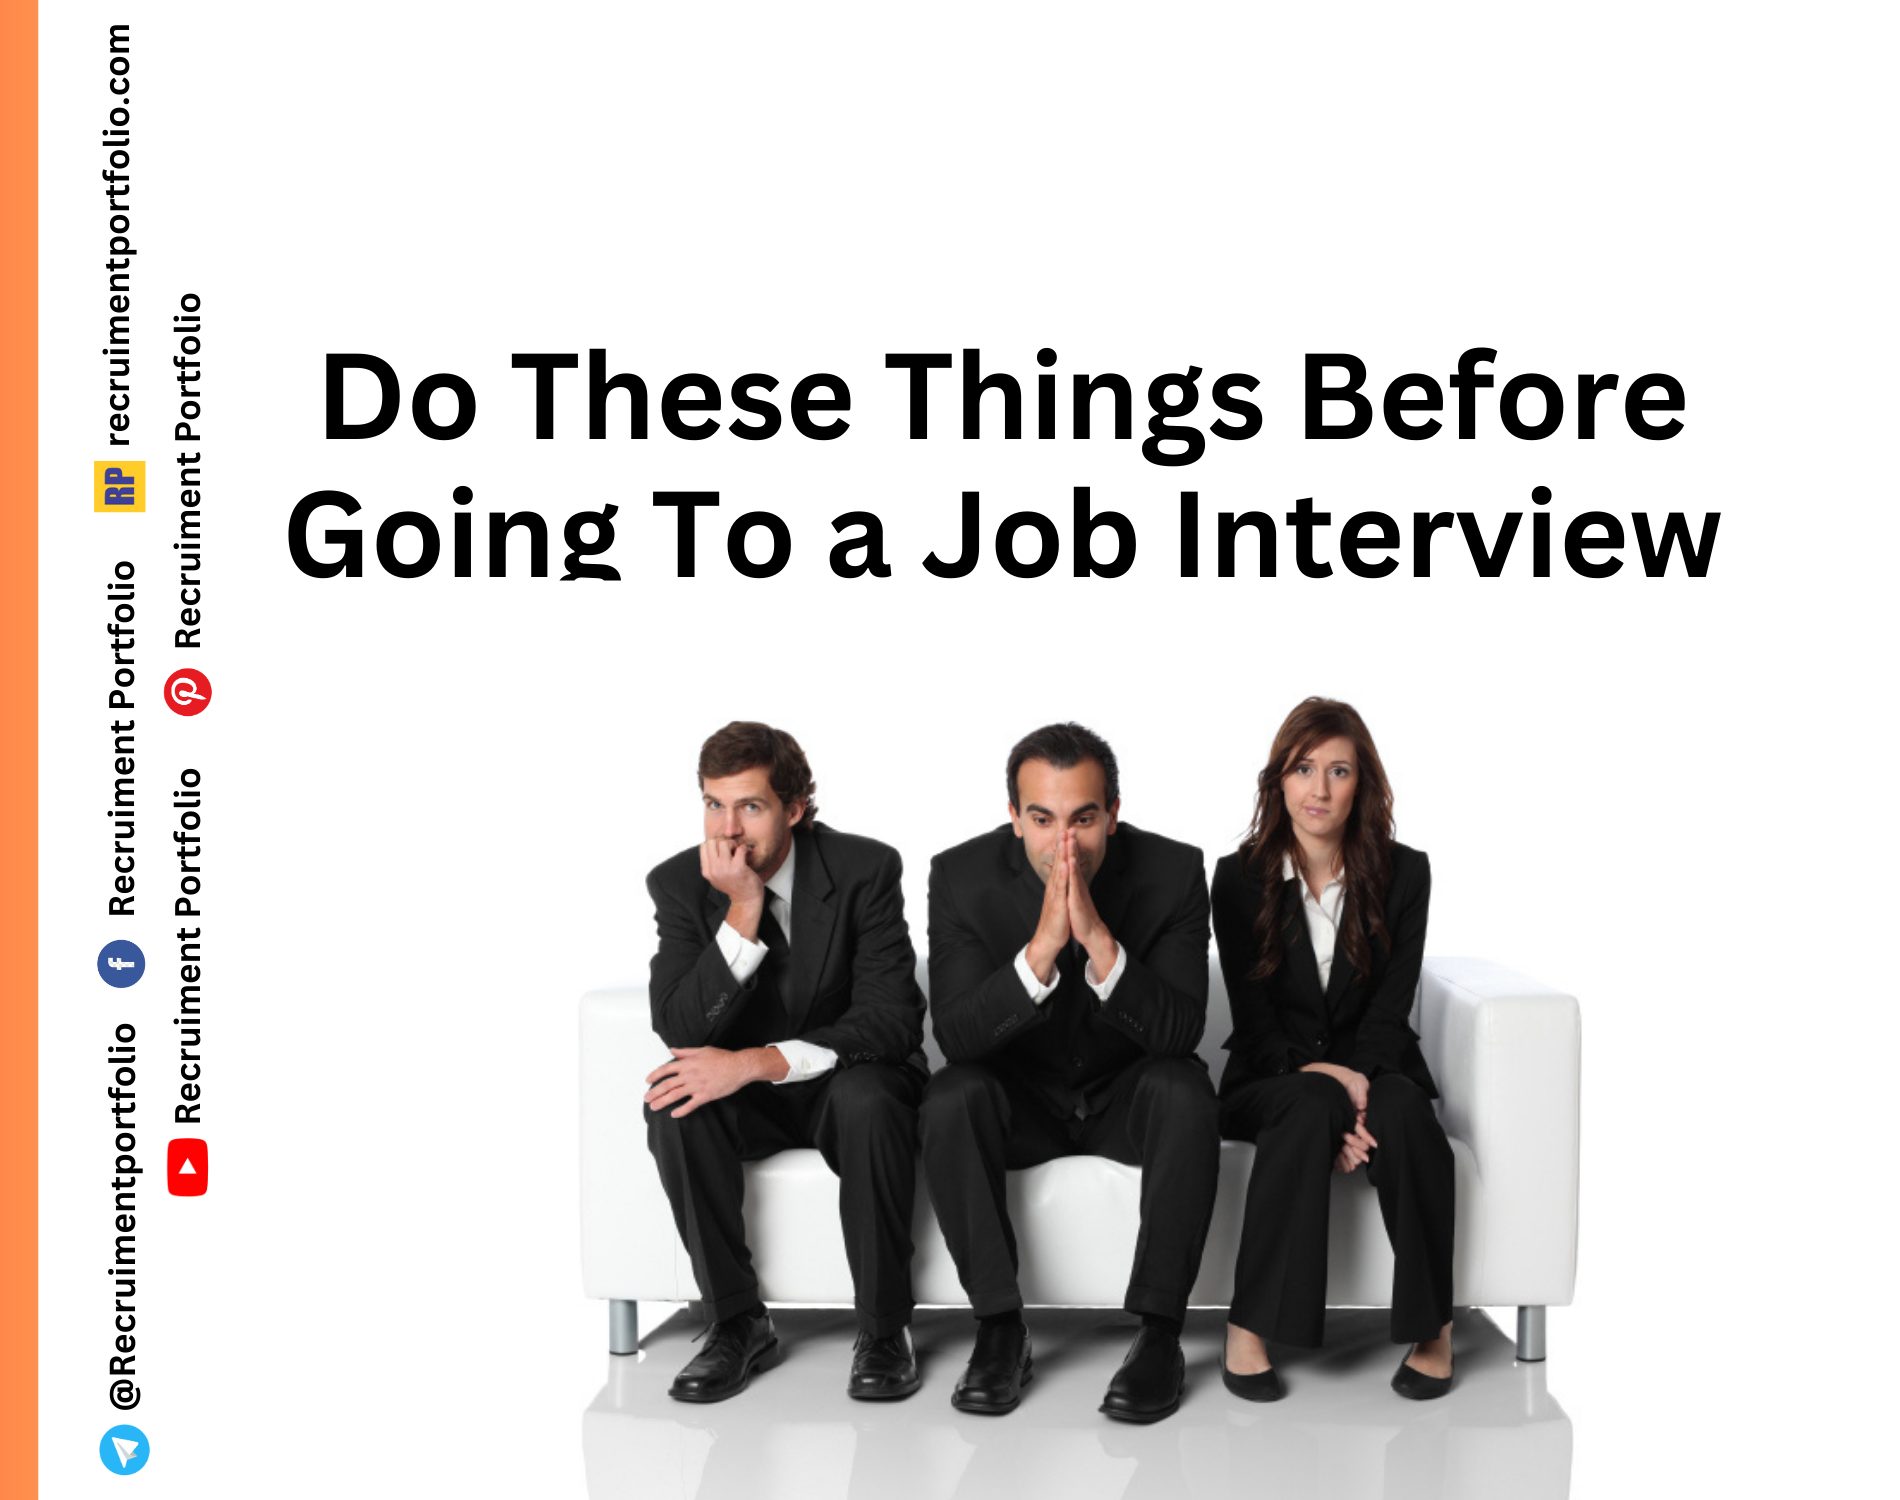 Do These Things Before Going To a Job Interview